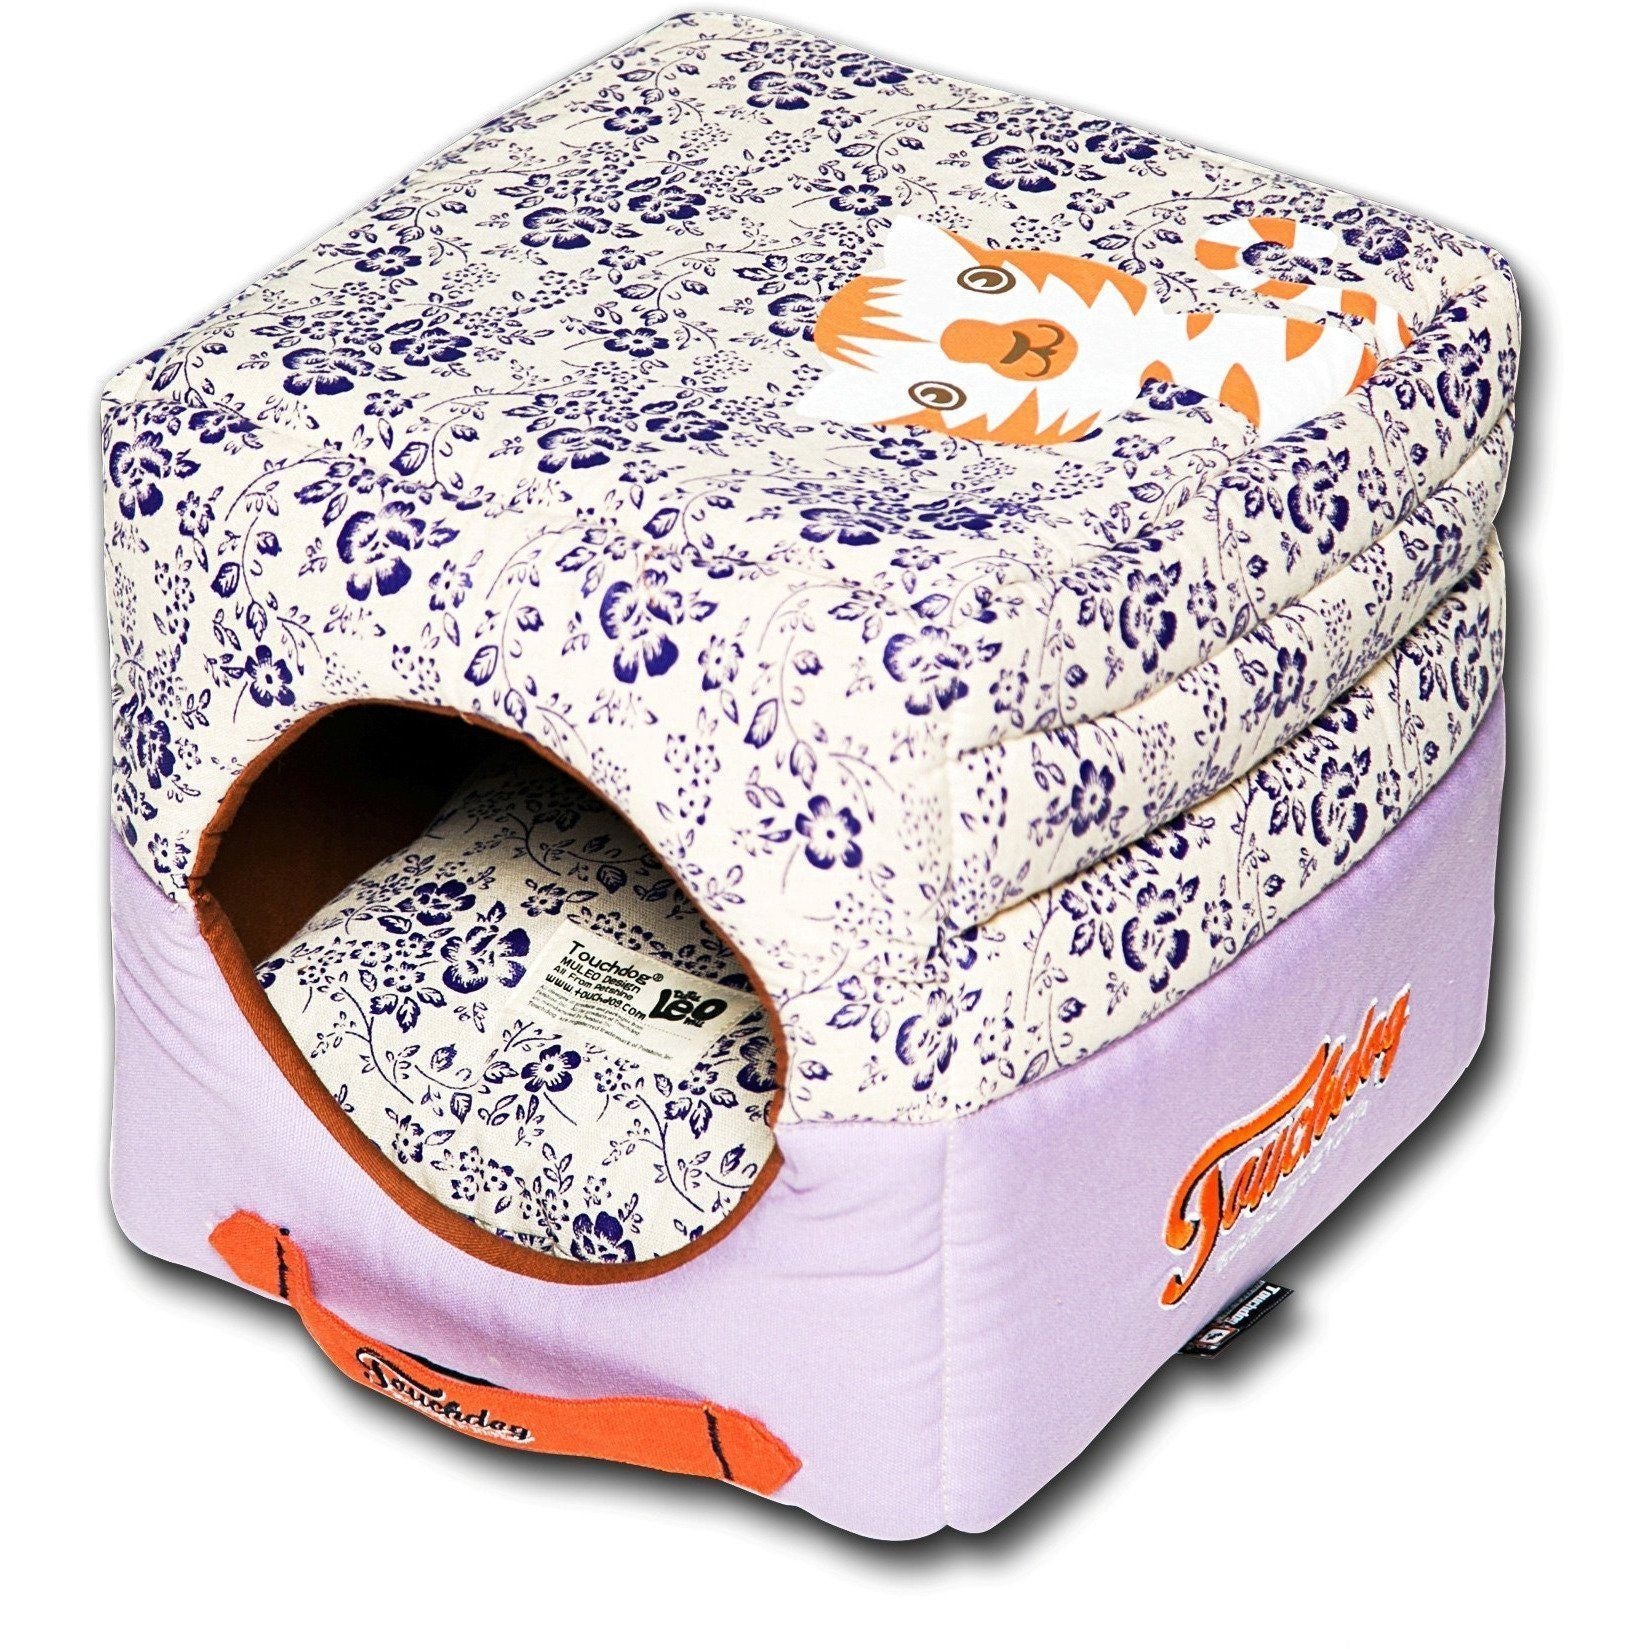 Touchdog ® 'Floral-Galoral' 2-in-1 Collapsible Squared Dog and Cat Bed Lavender Purple, Cream White 